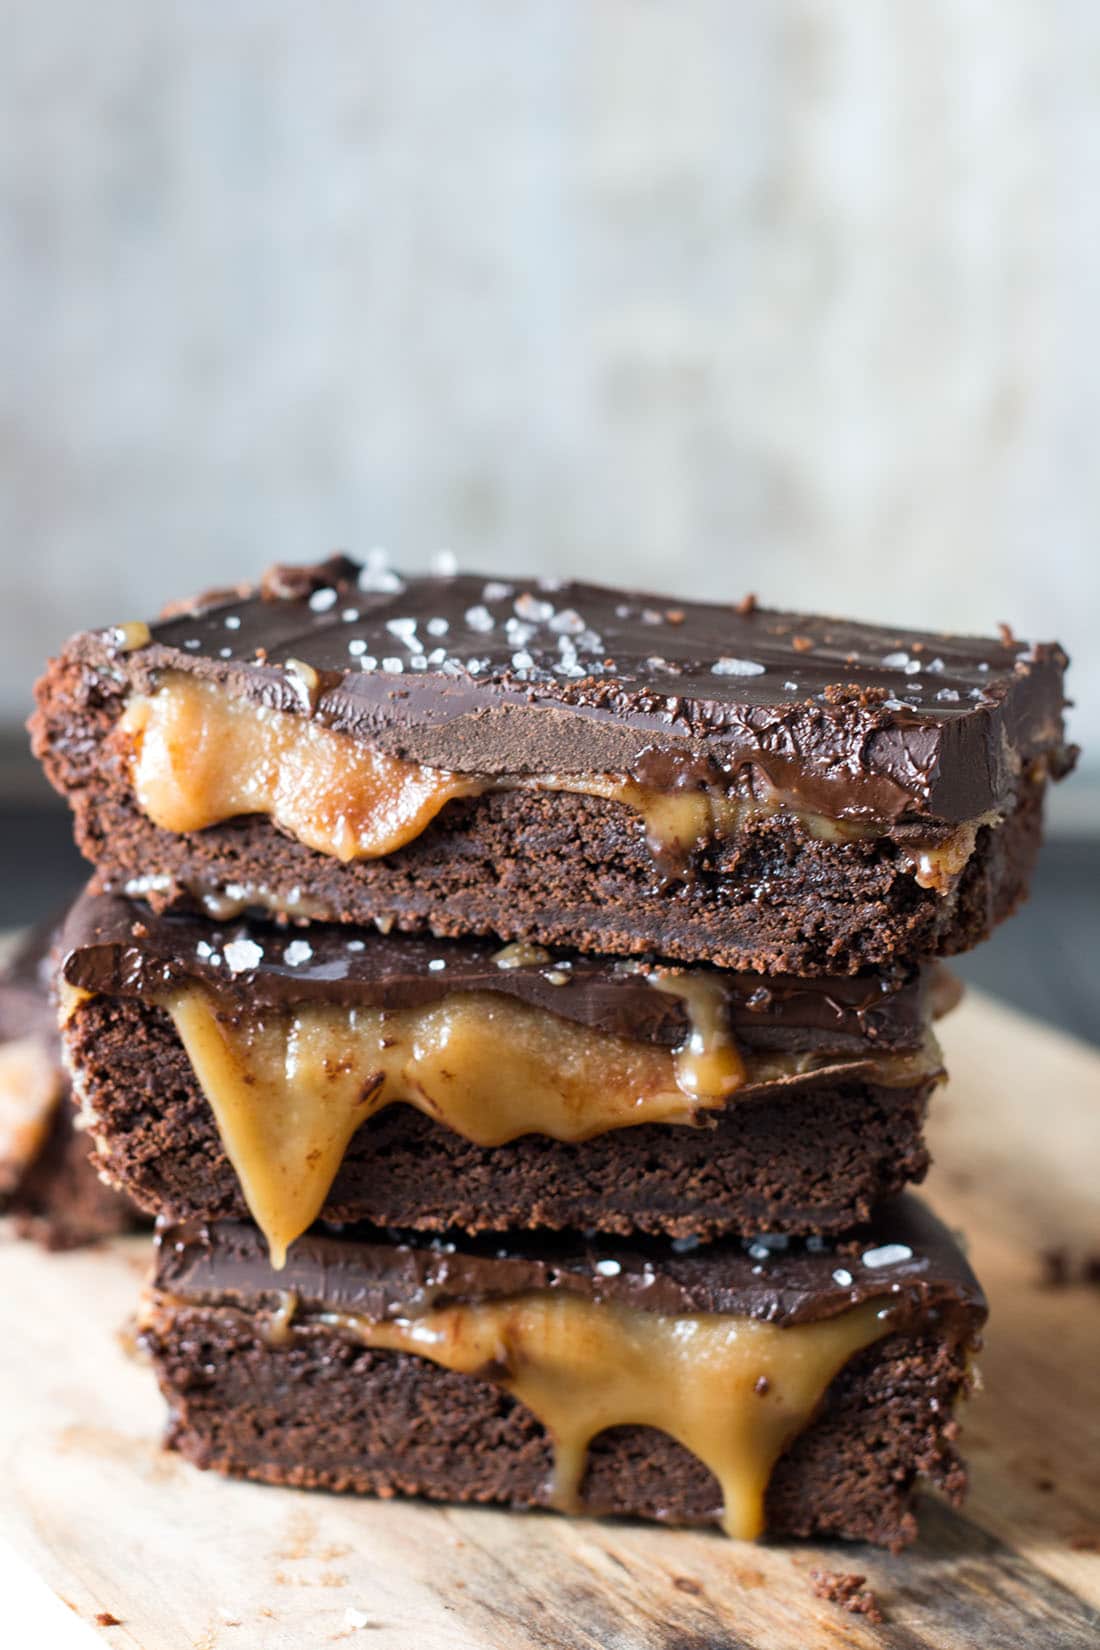 Cut slices of the Salted Chocolate & Caramel Bars stacked and piled on each other with the caramel oozing out and the salt on top